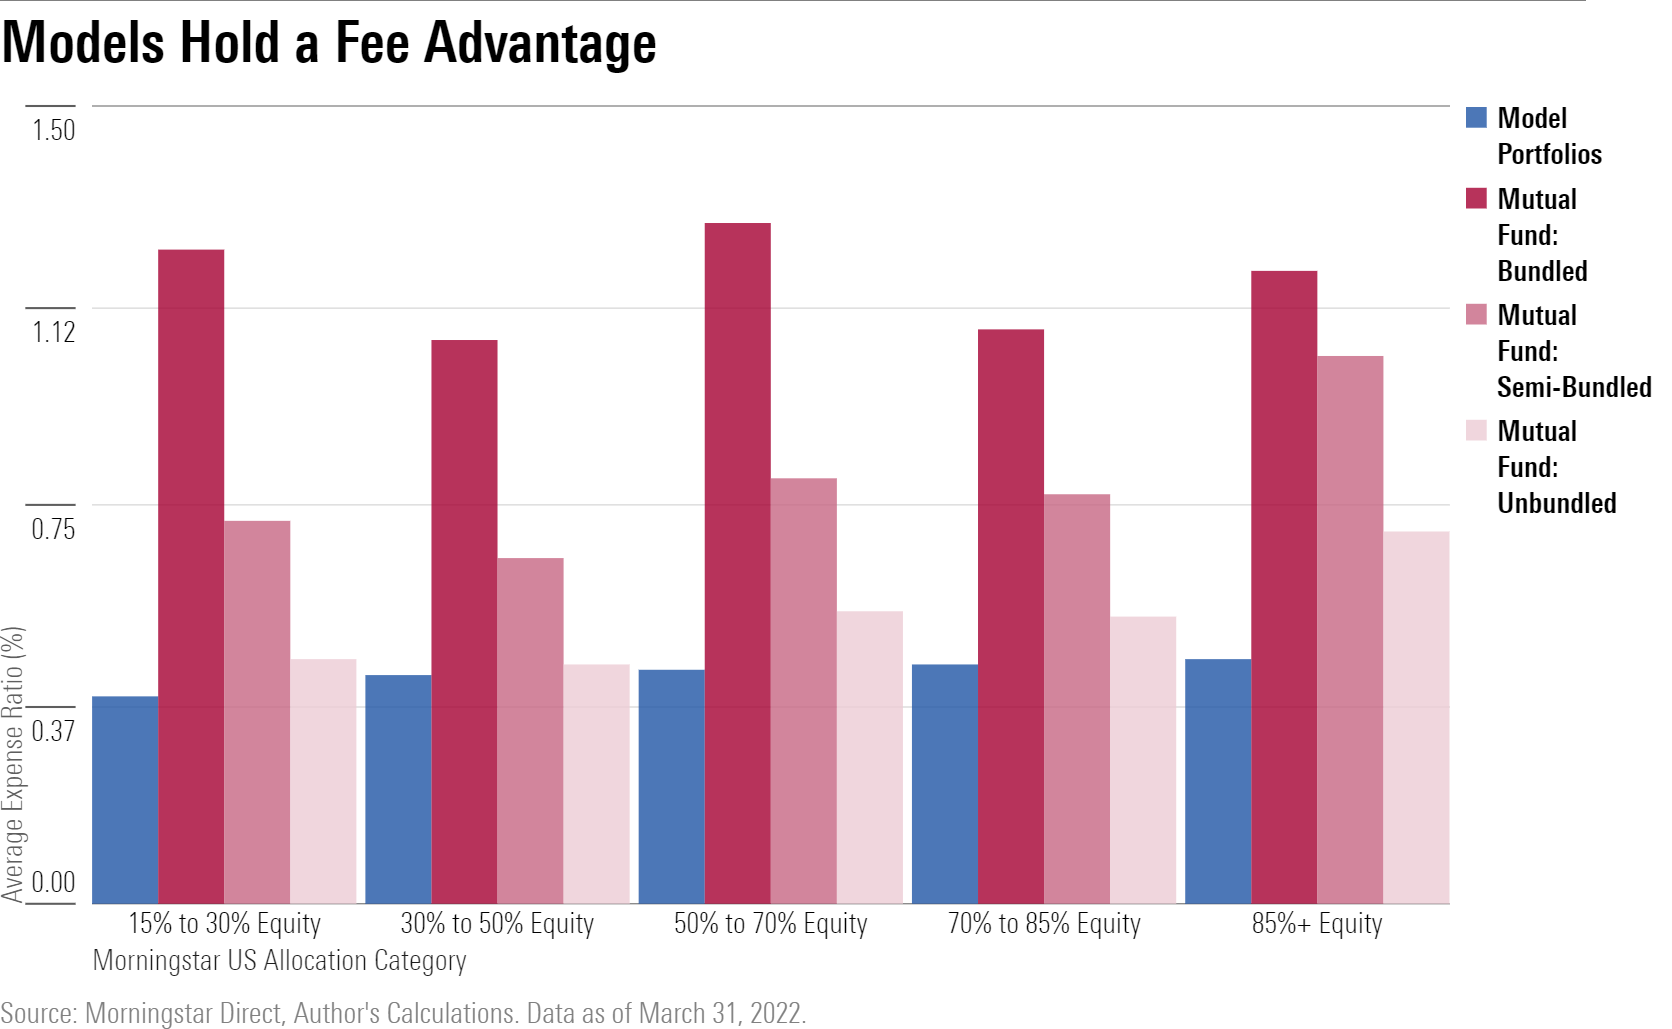 A bar chart illustrating that model portfolios in the allocation Morningstar Categories have lower fees than their mutual fund counterparts.